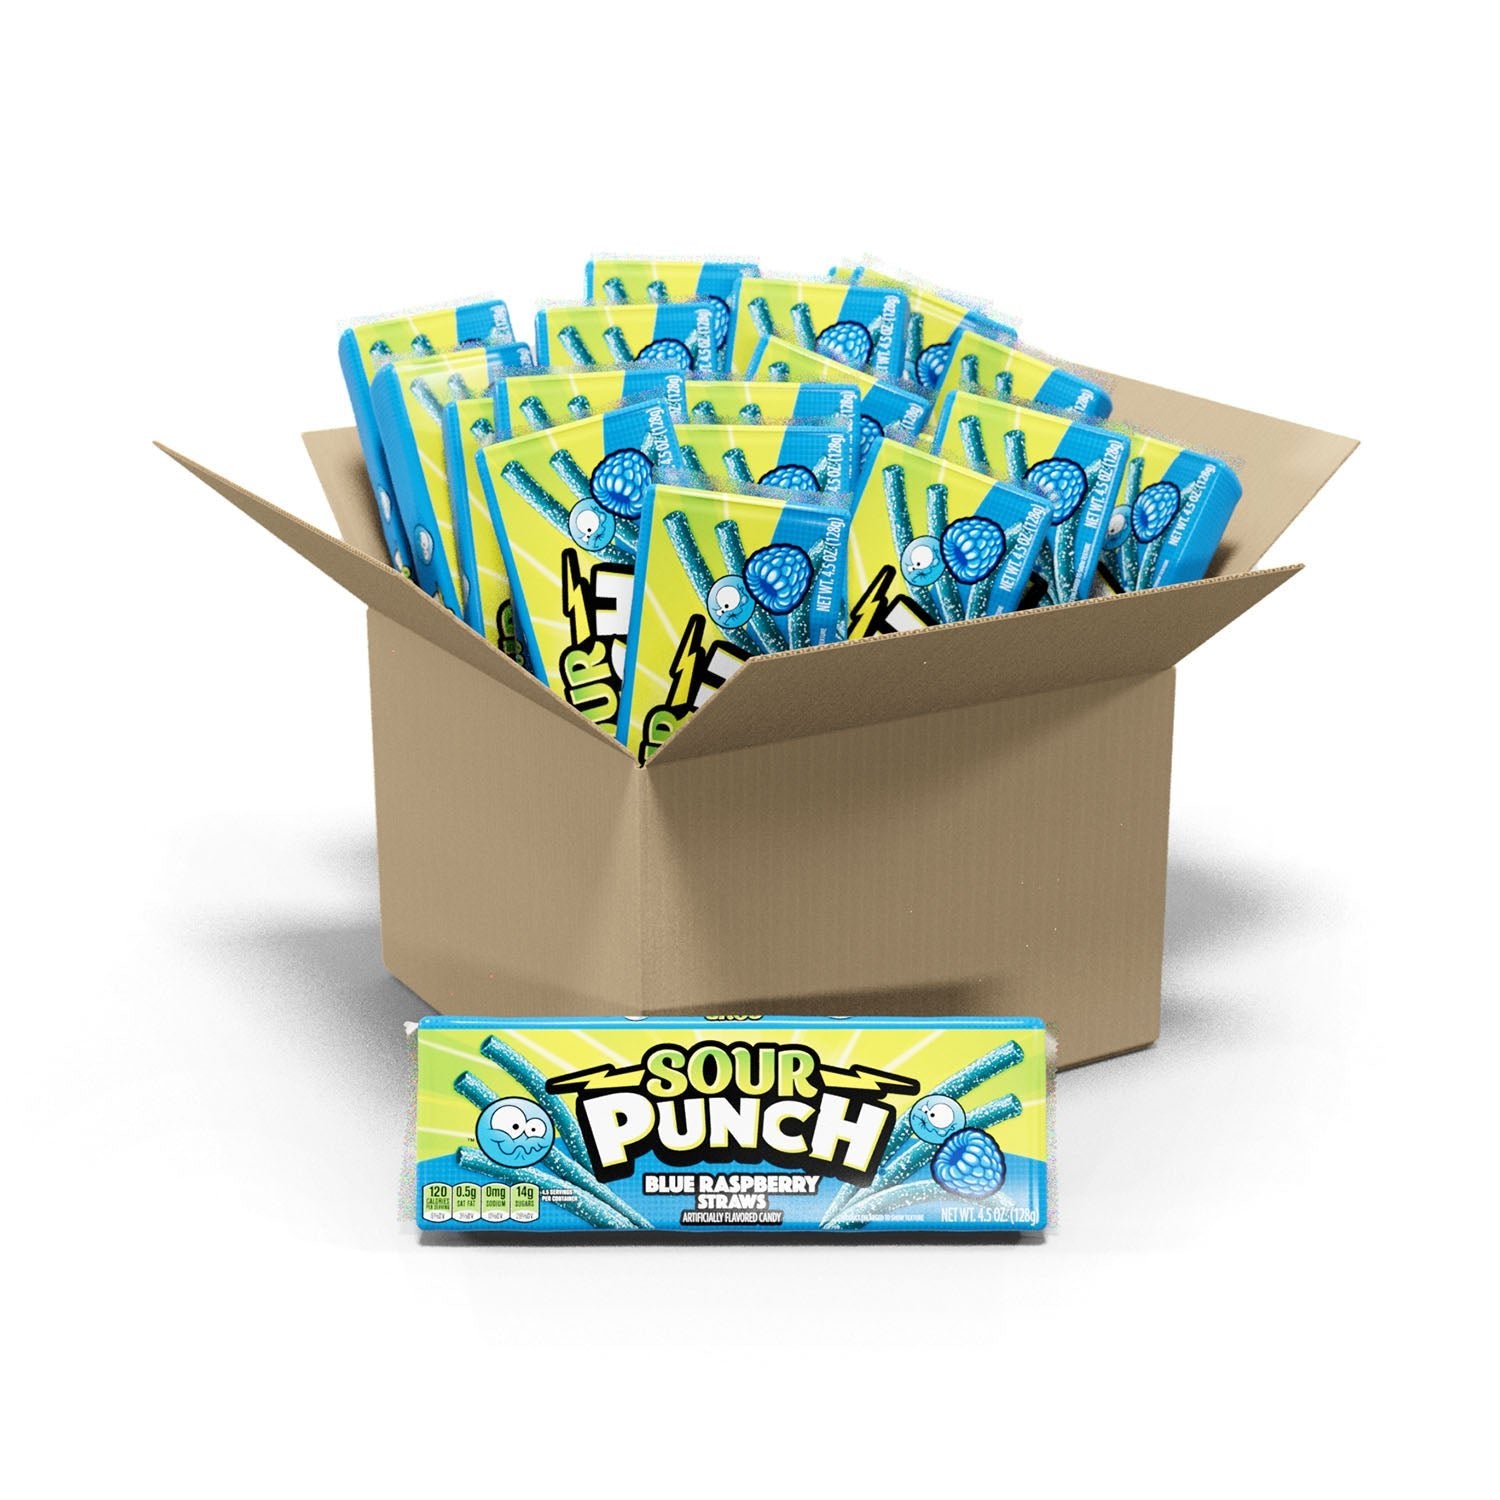 24 count bulk candy box of Sour Punch Blue Raspberry Straws 4.5oz Movie Trays